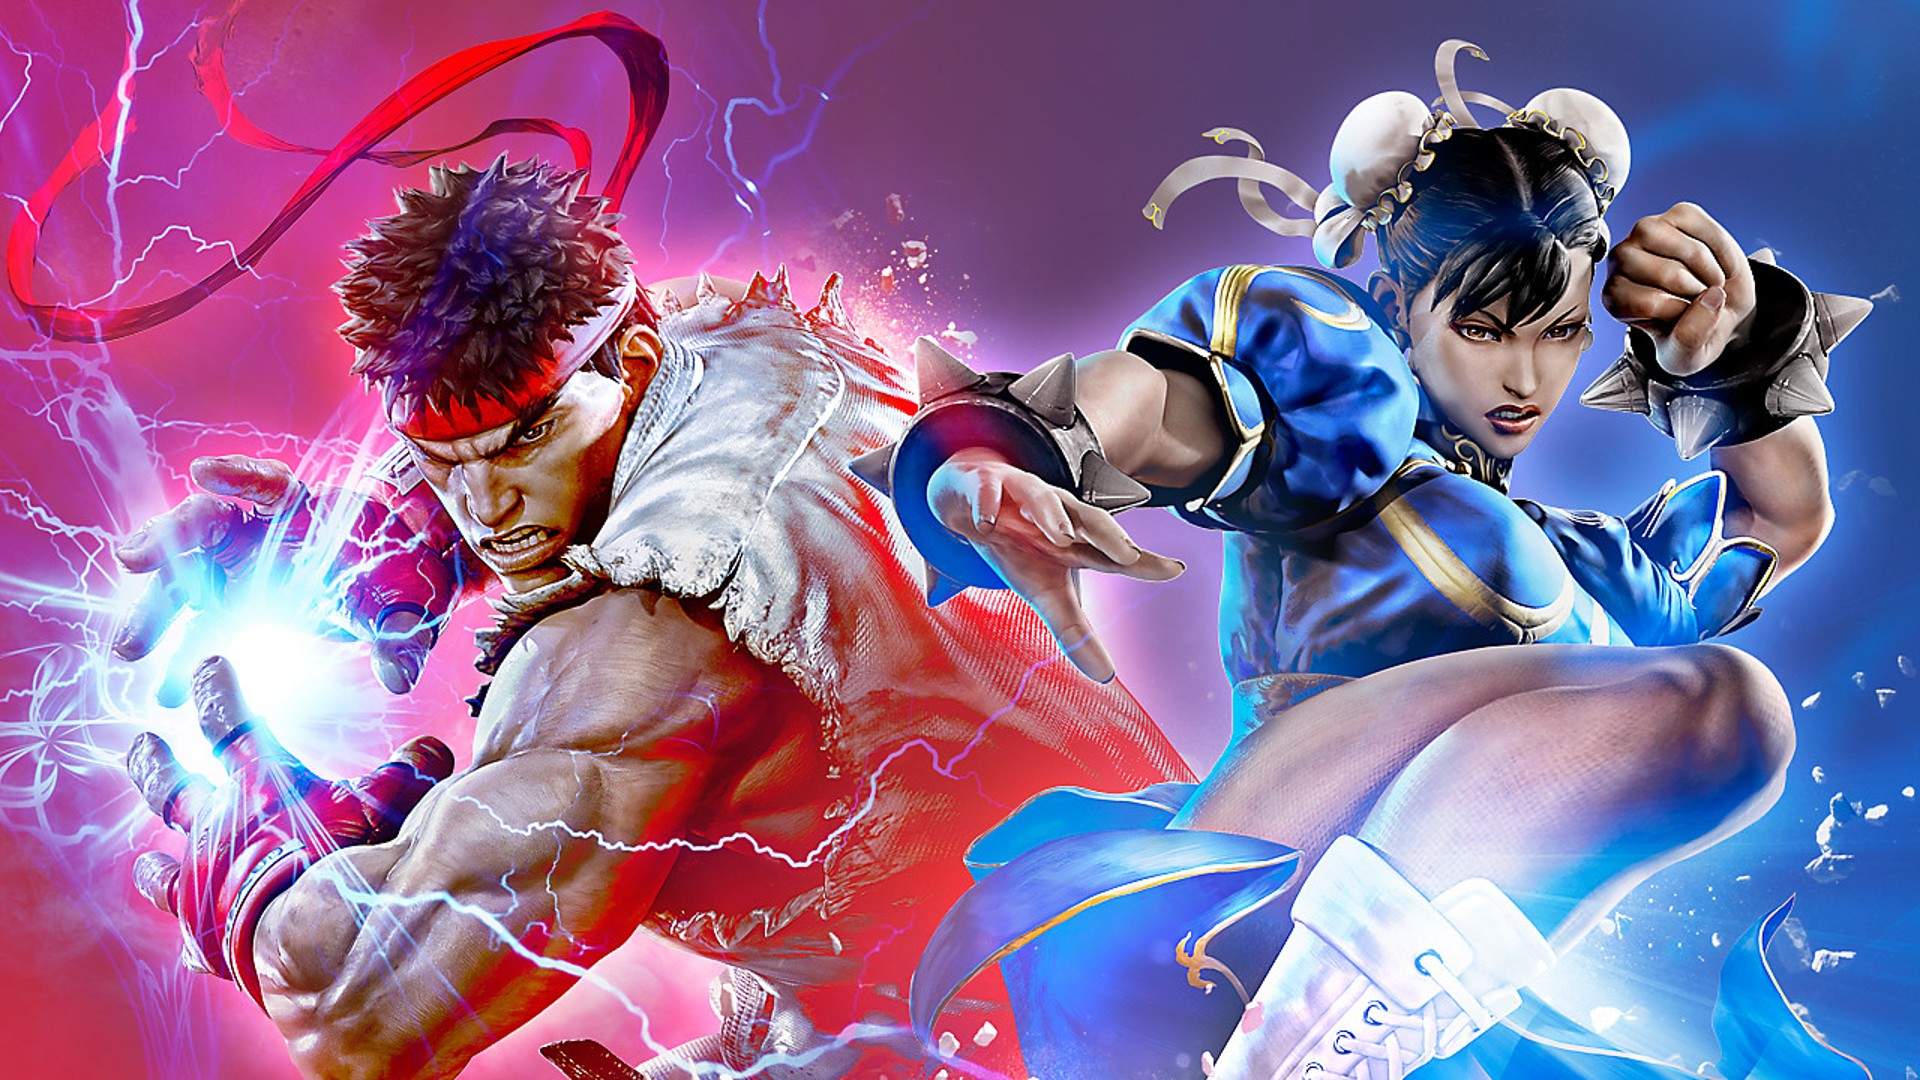 Street Fighter 6 is now available